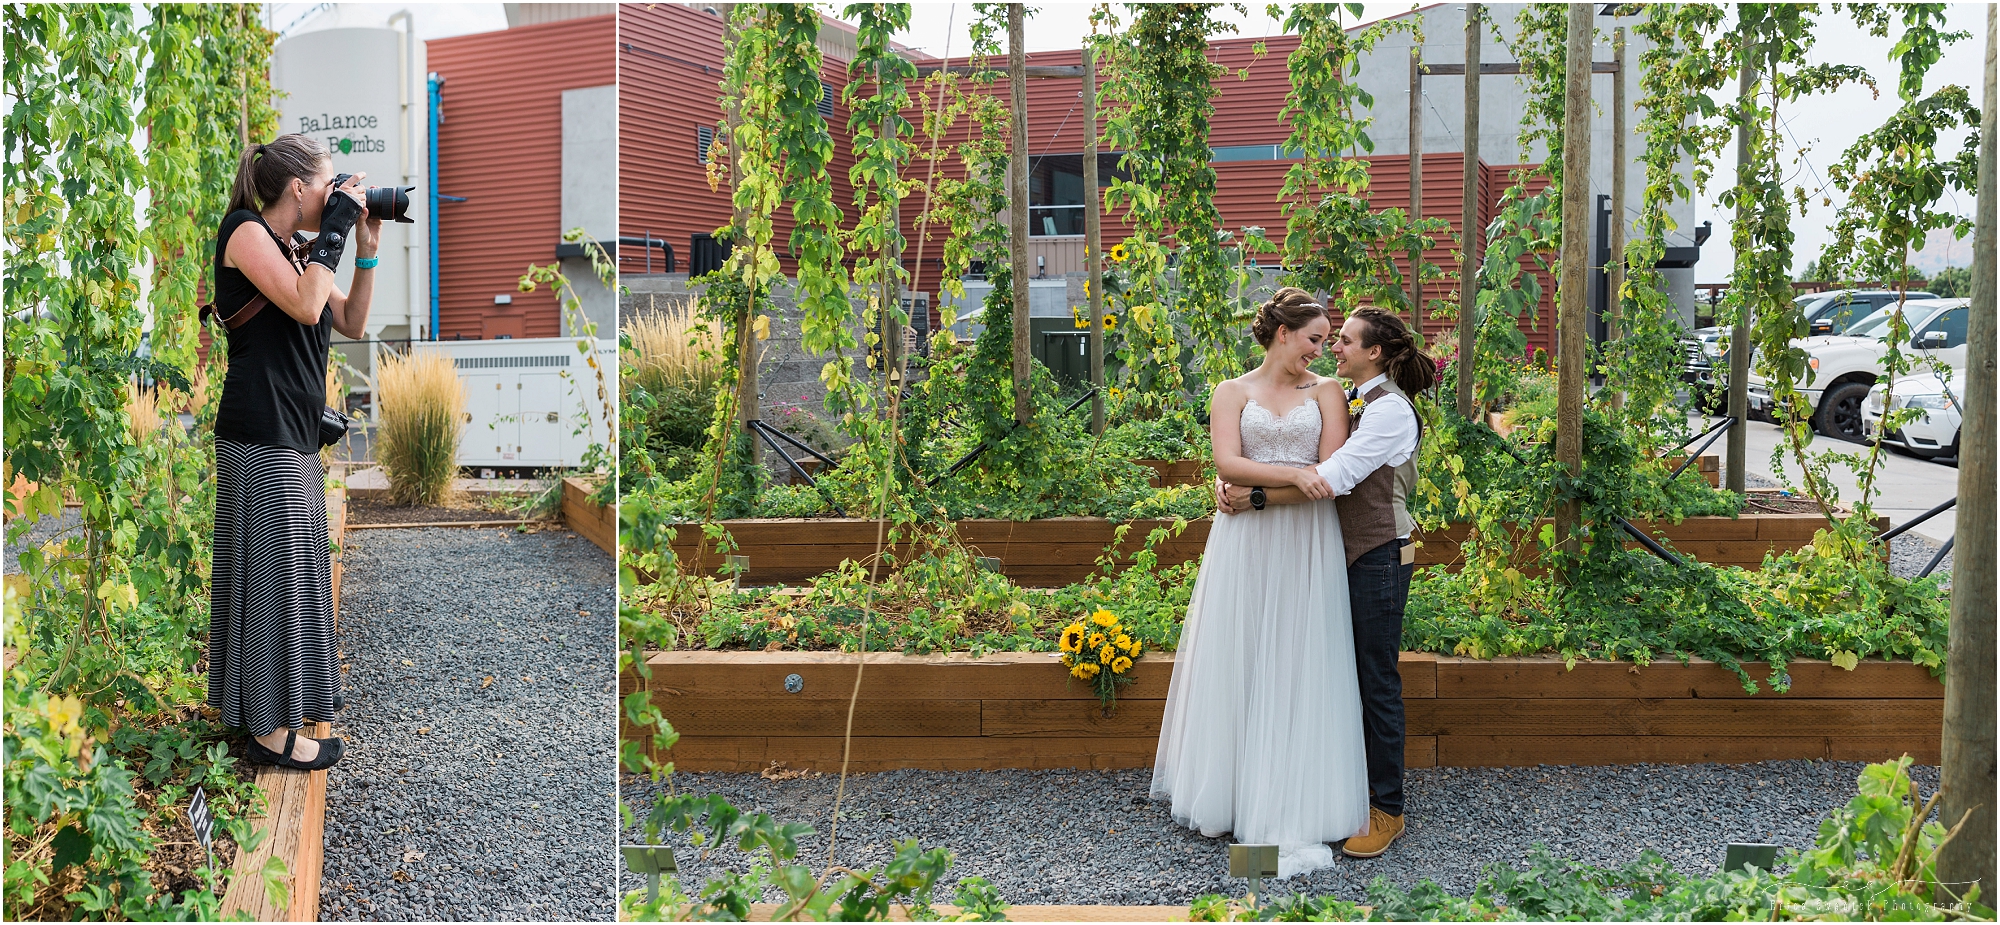 The gorgeous greenery of the hop vines against the red brick walls makes for beautiful romantic couple's portraits at a Worthy Brewing Wedding in Bend Oregon. | Erica Swantek Photography